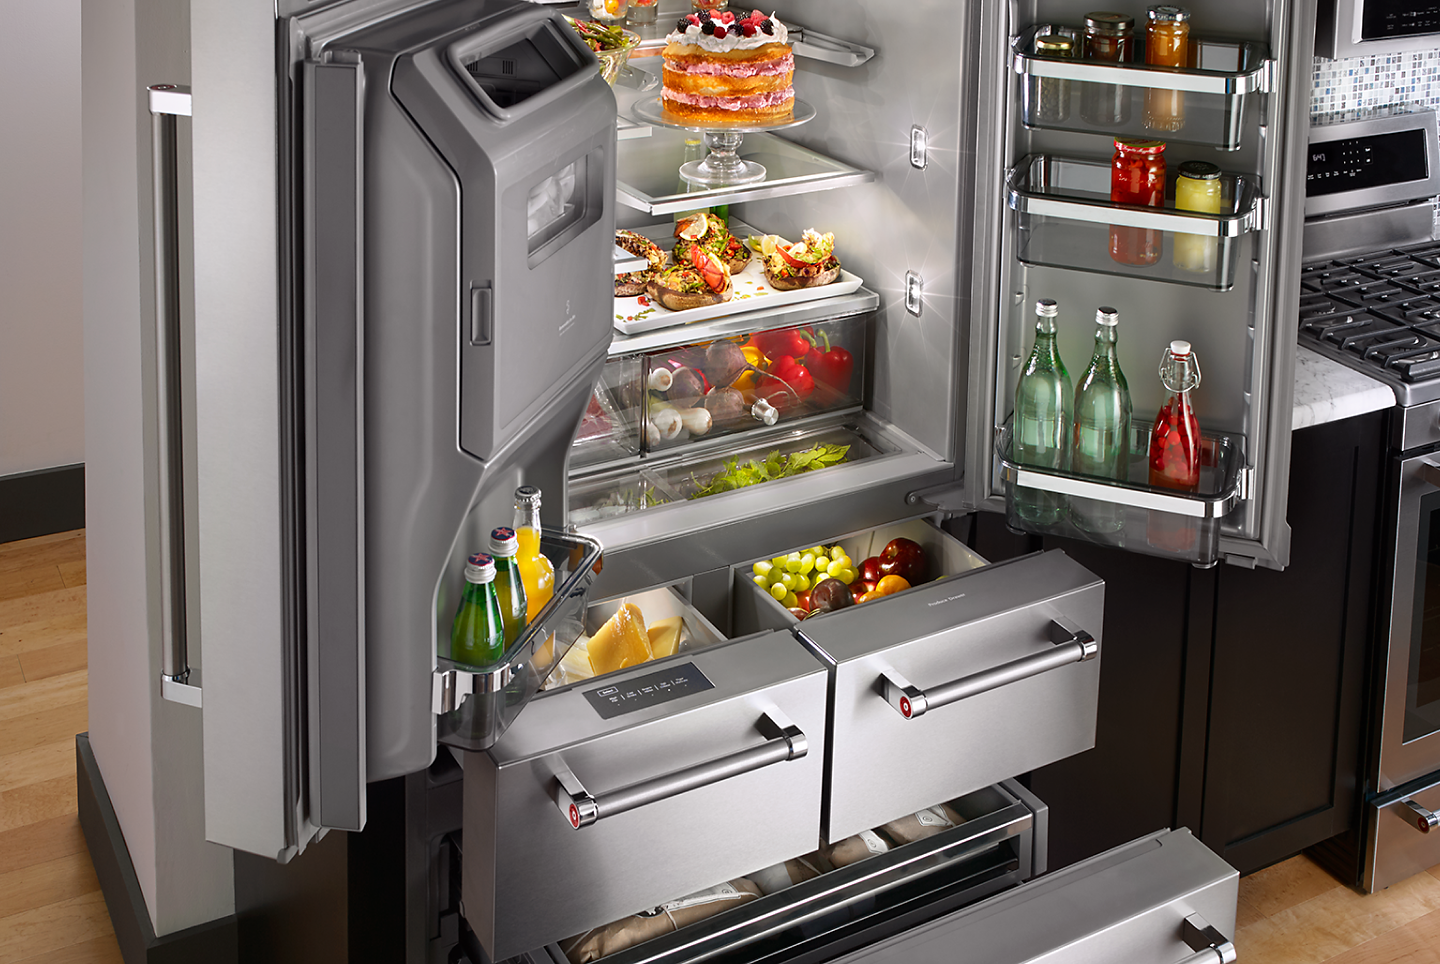 The doors and various compartments of a French door refrigerator open with groceries inside